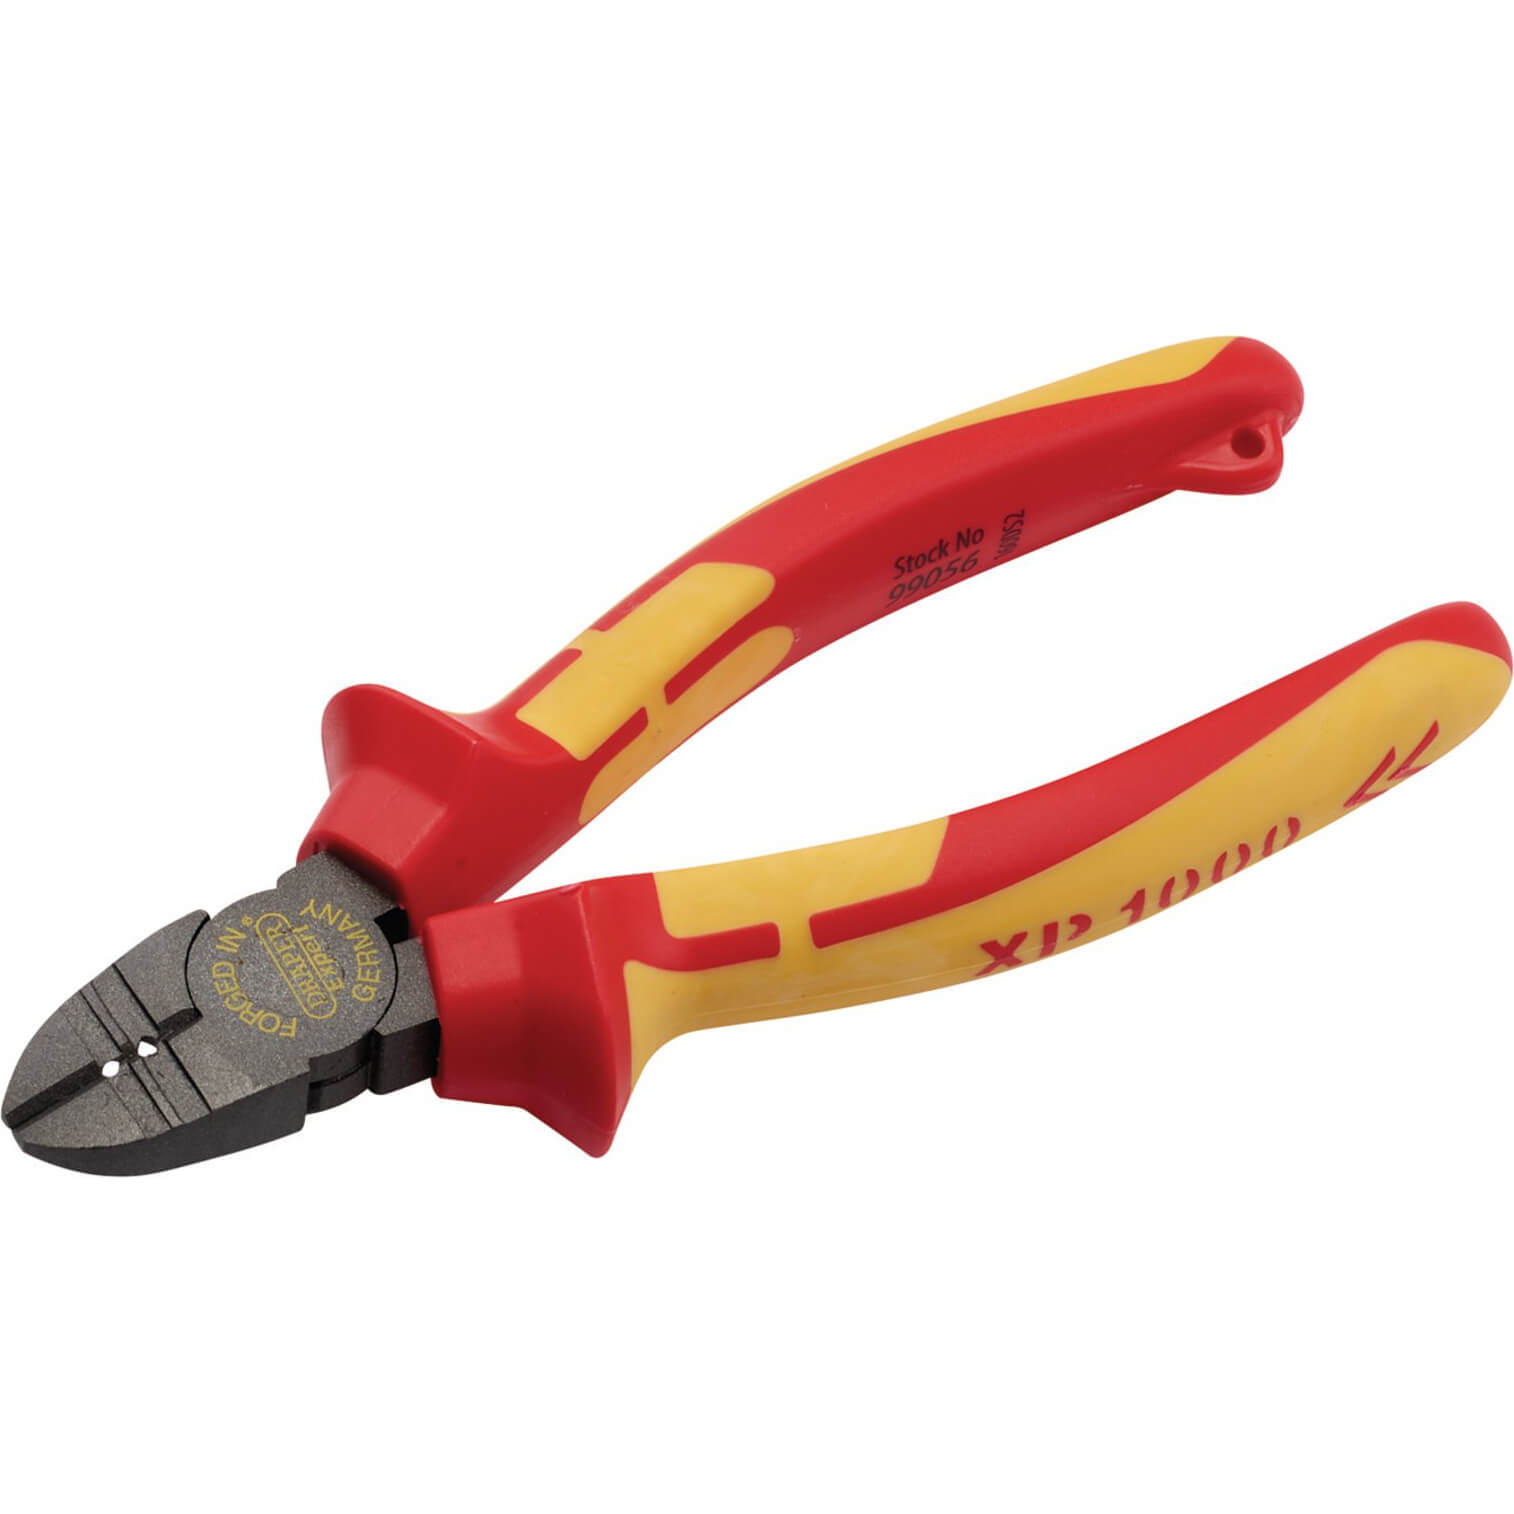 Photo of Draper Xp1000 Vde Tethered Side Cutter Wire Stripper Pliers 160mm